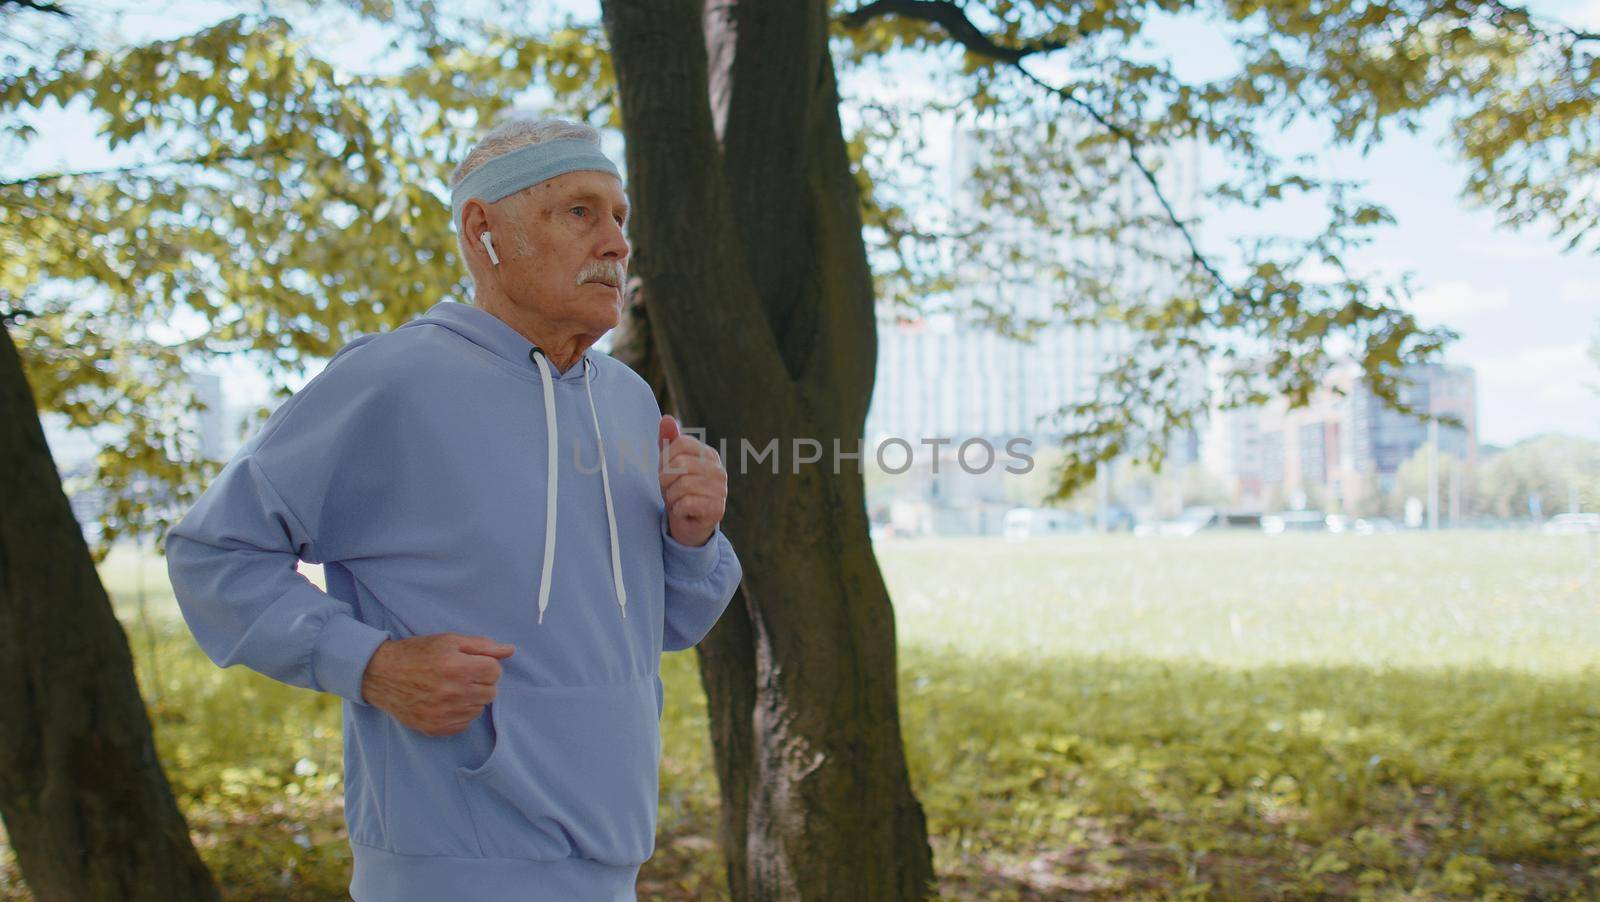 Athletic fitness senior elderly sport runner man training. Workout cardio outside in city park at morning. Happy old grandfather enjoying healthy lifestyle. Active retired mature people motivation